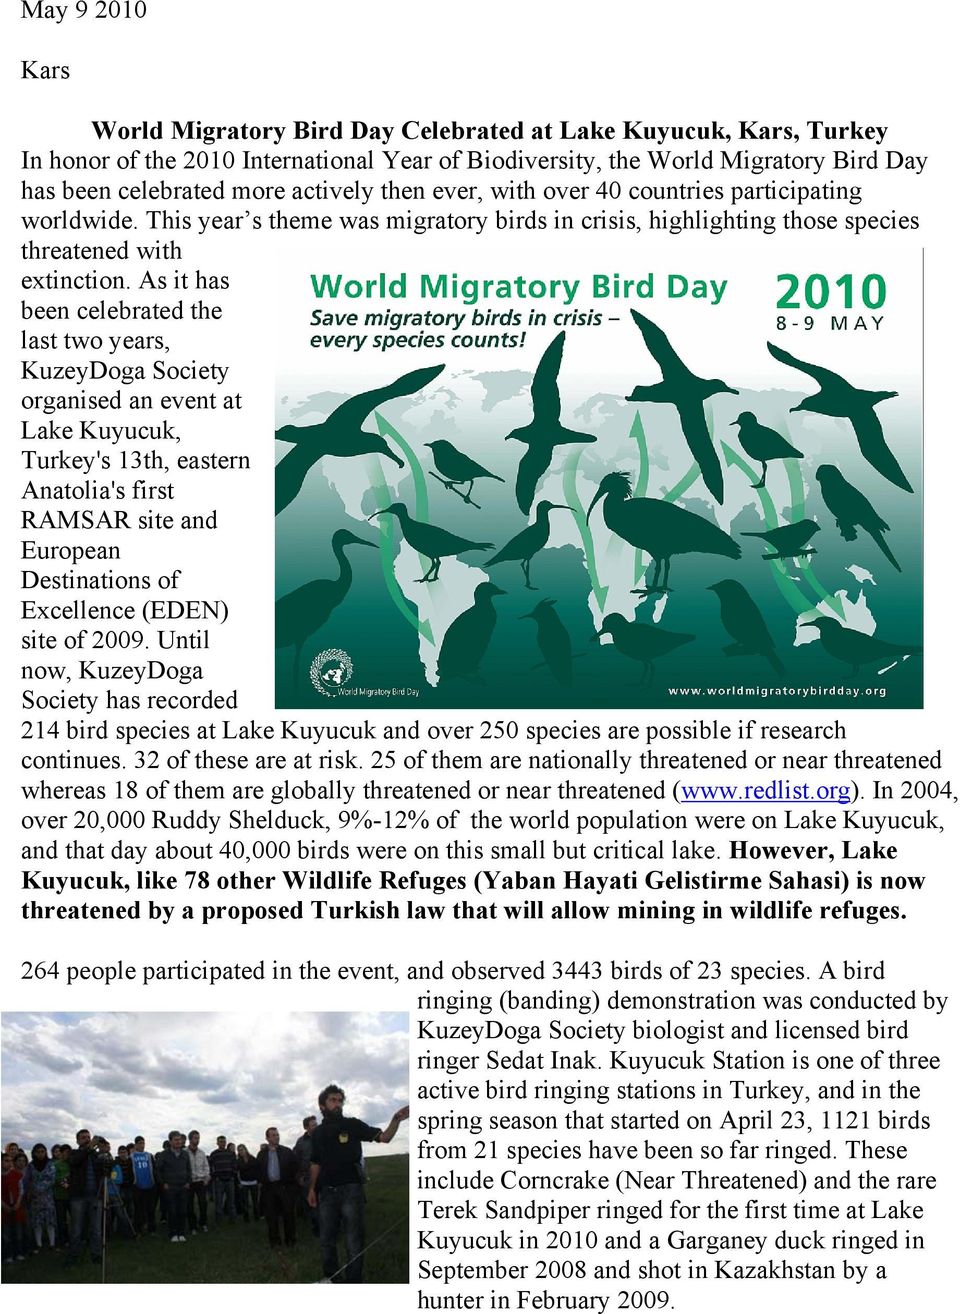 As it has been celebrated the last two years, KuzeyDoga Society organised an event at Lake Kuyucuk, Turkey's 13th, eastern Anatolia's first RAMSAR site and European Destinations of Excellence (EDEN)